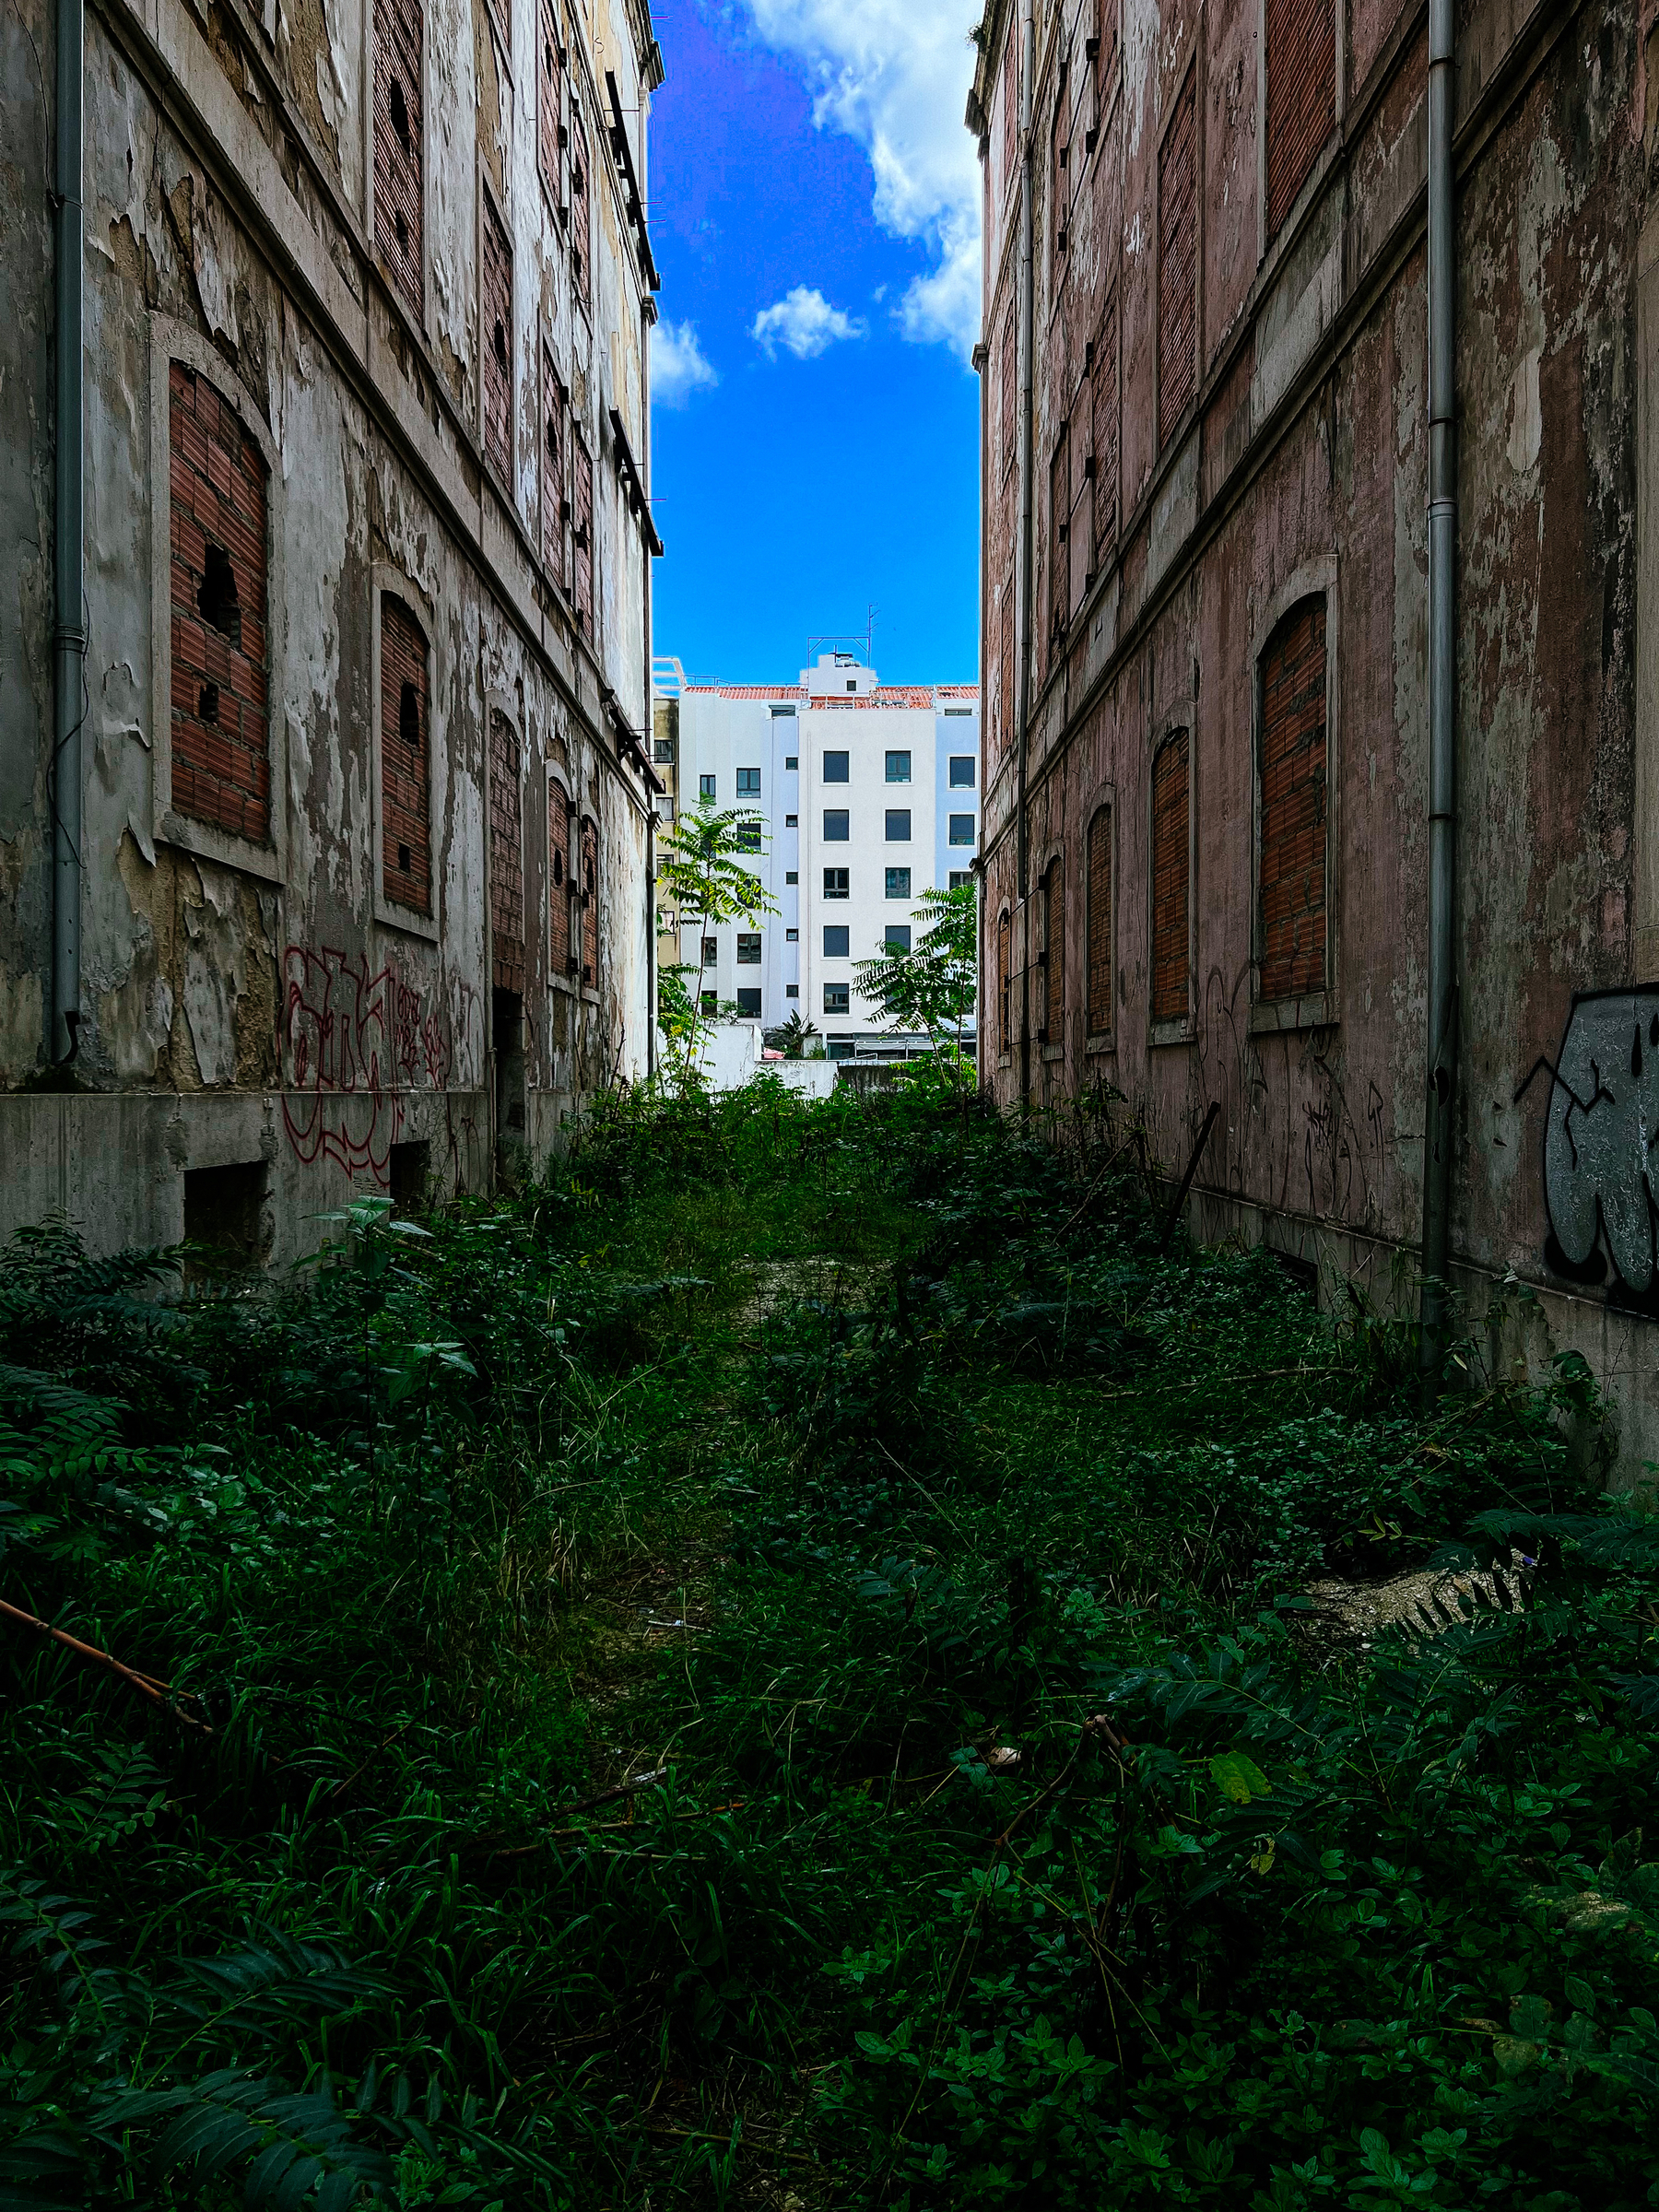 Looking out at some modern buildings, flanked by old derelict ones, with weeds growing in the middle 